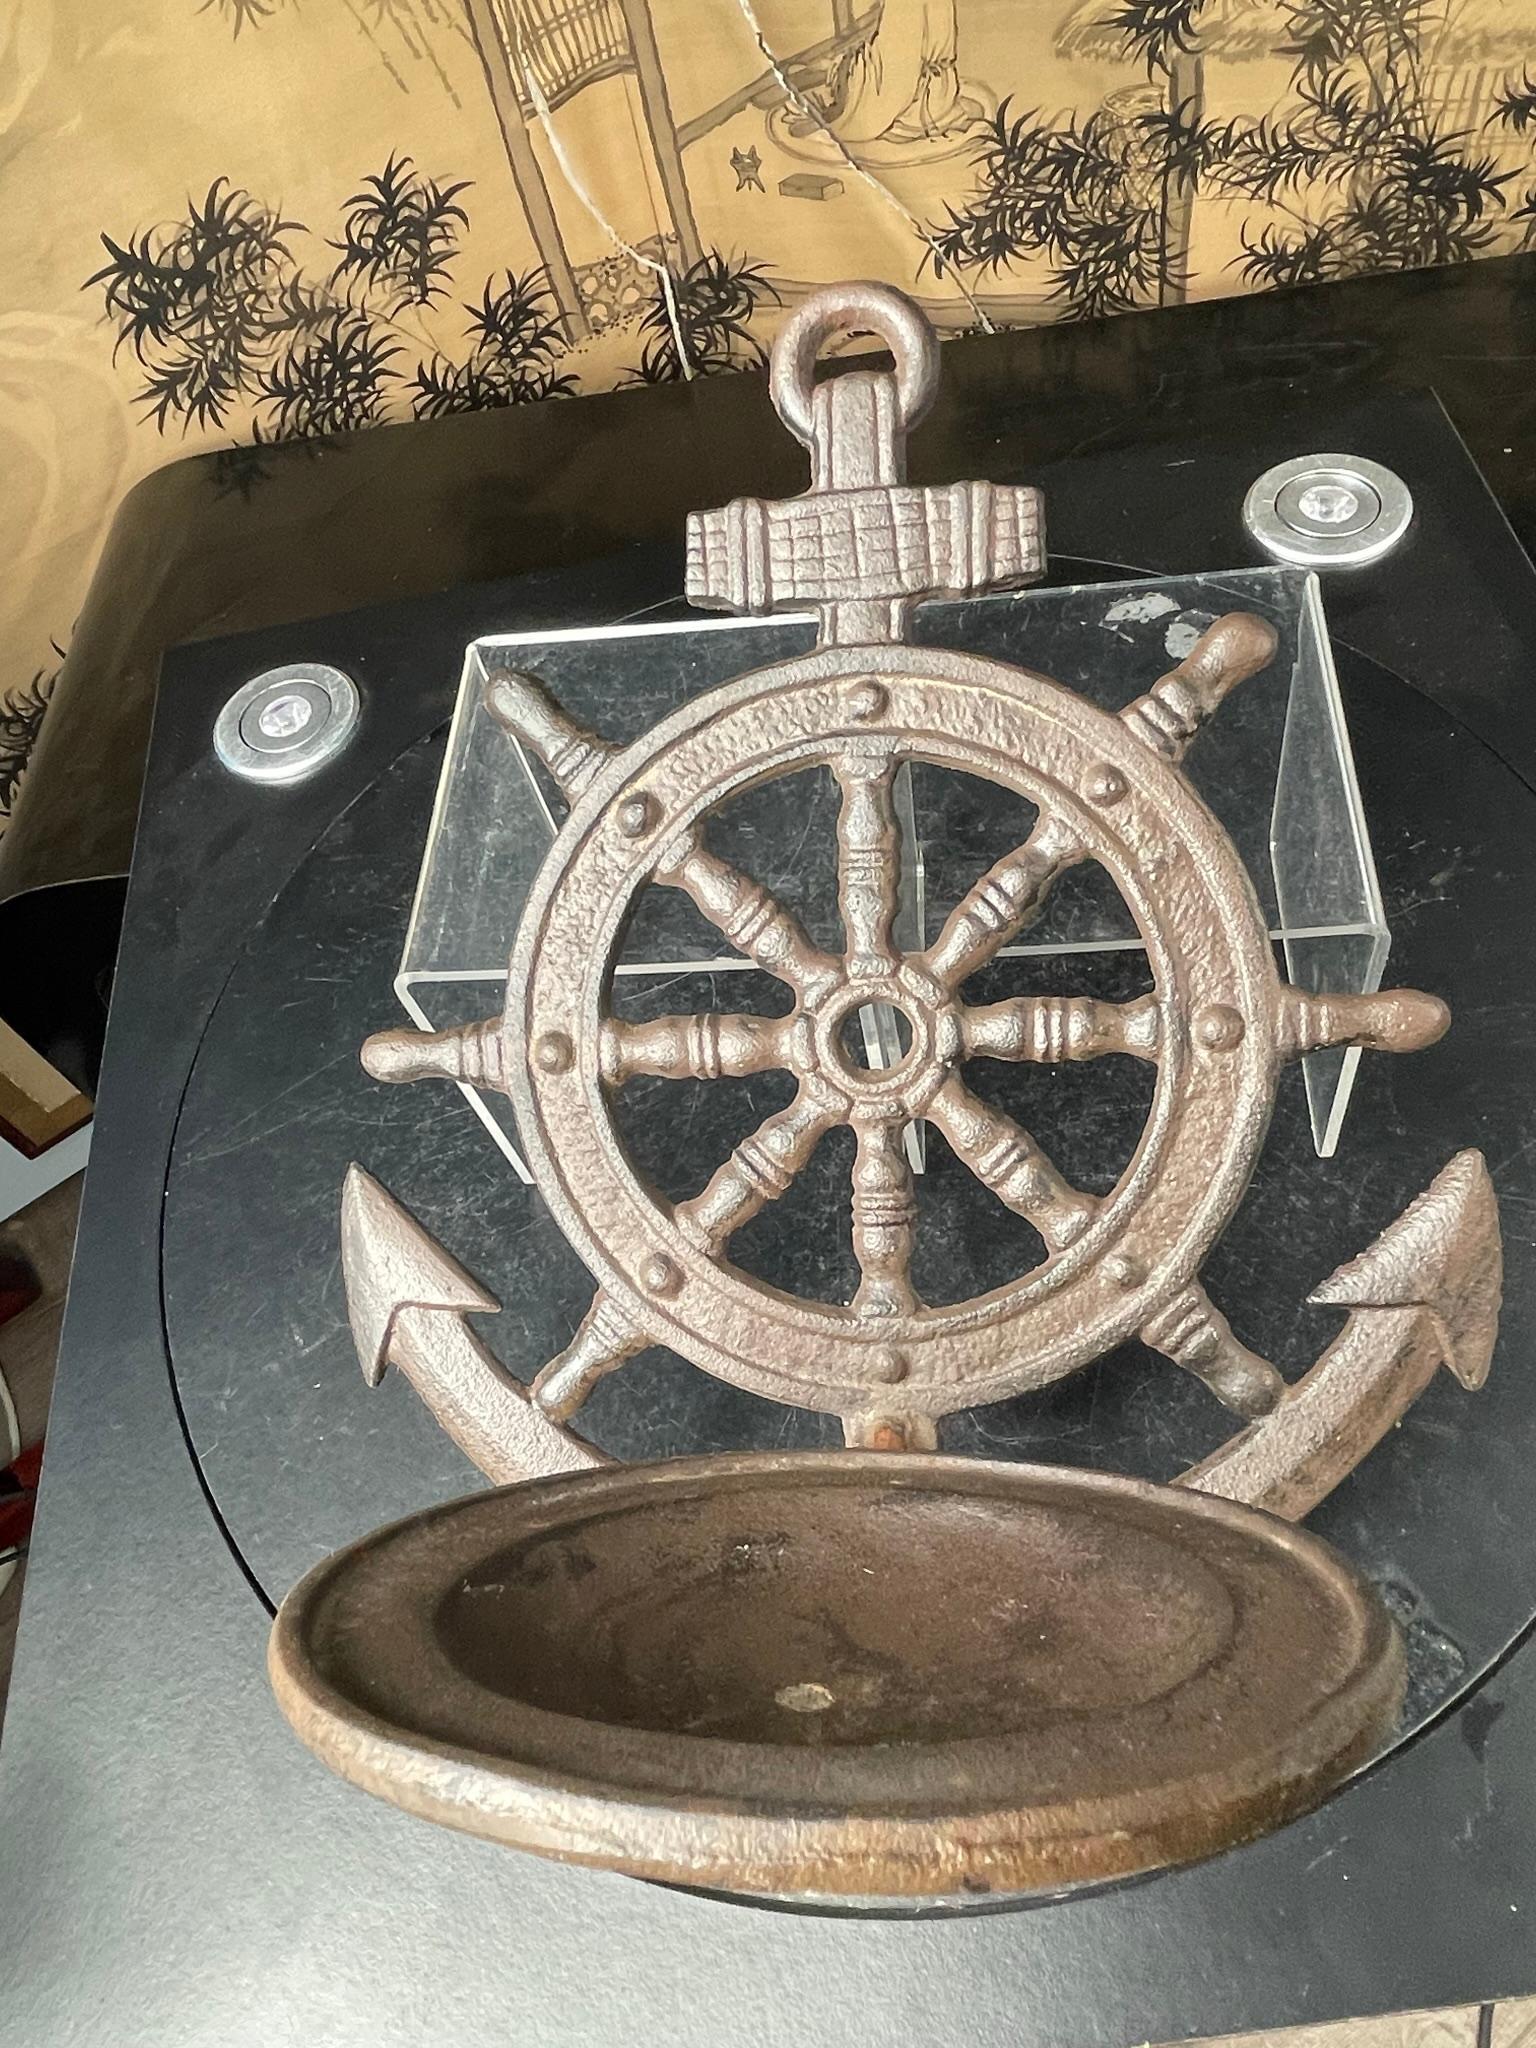 Nautical Lovers Delight- first we've seen

Unique Antique Boating Helm Wheel And Anchor Wall Shelf -a veresatile decorative accent perfect for displaying your LED, candles, or plant pot. 

Heavy quality hand cast hinged wall shelf unfolds and